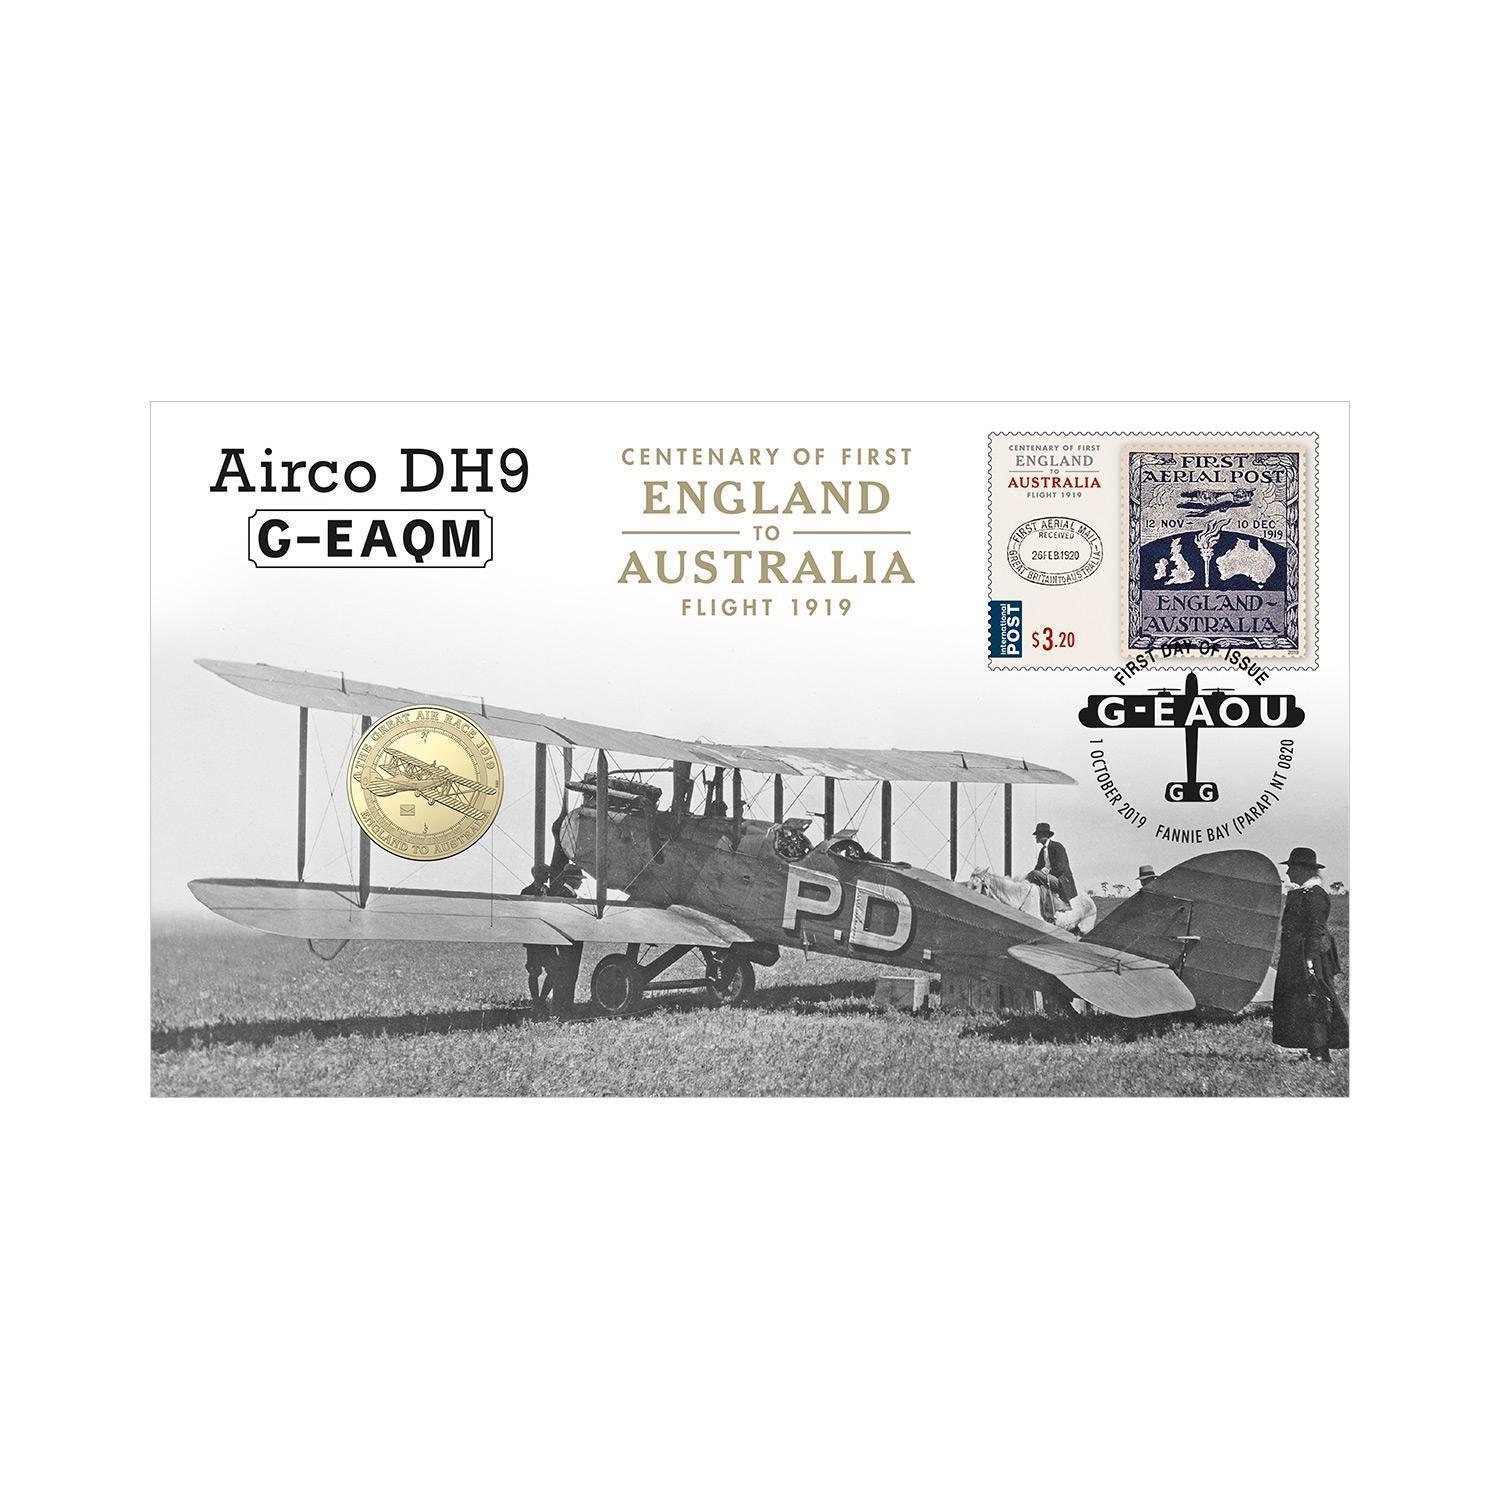 2019 $1 England to Australia First Flight Centenary DH9 G-EAQM Stamp & Coin Cover PNC